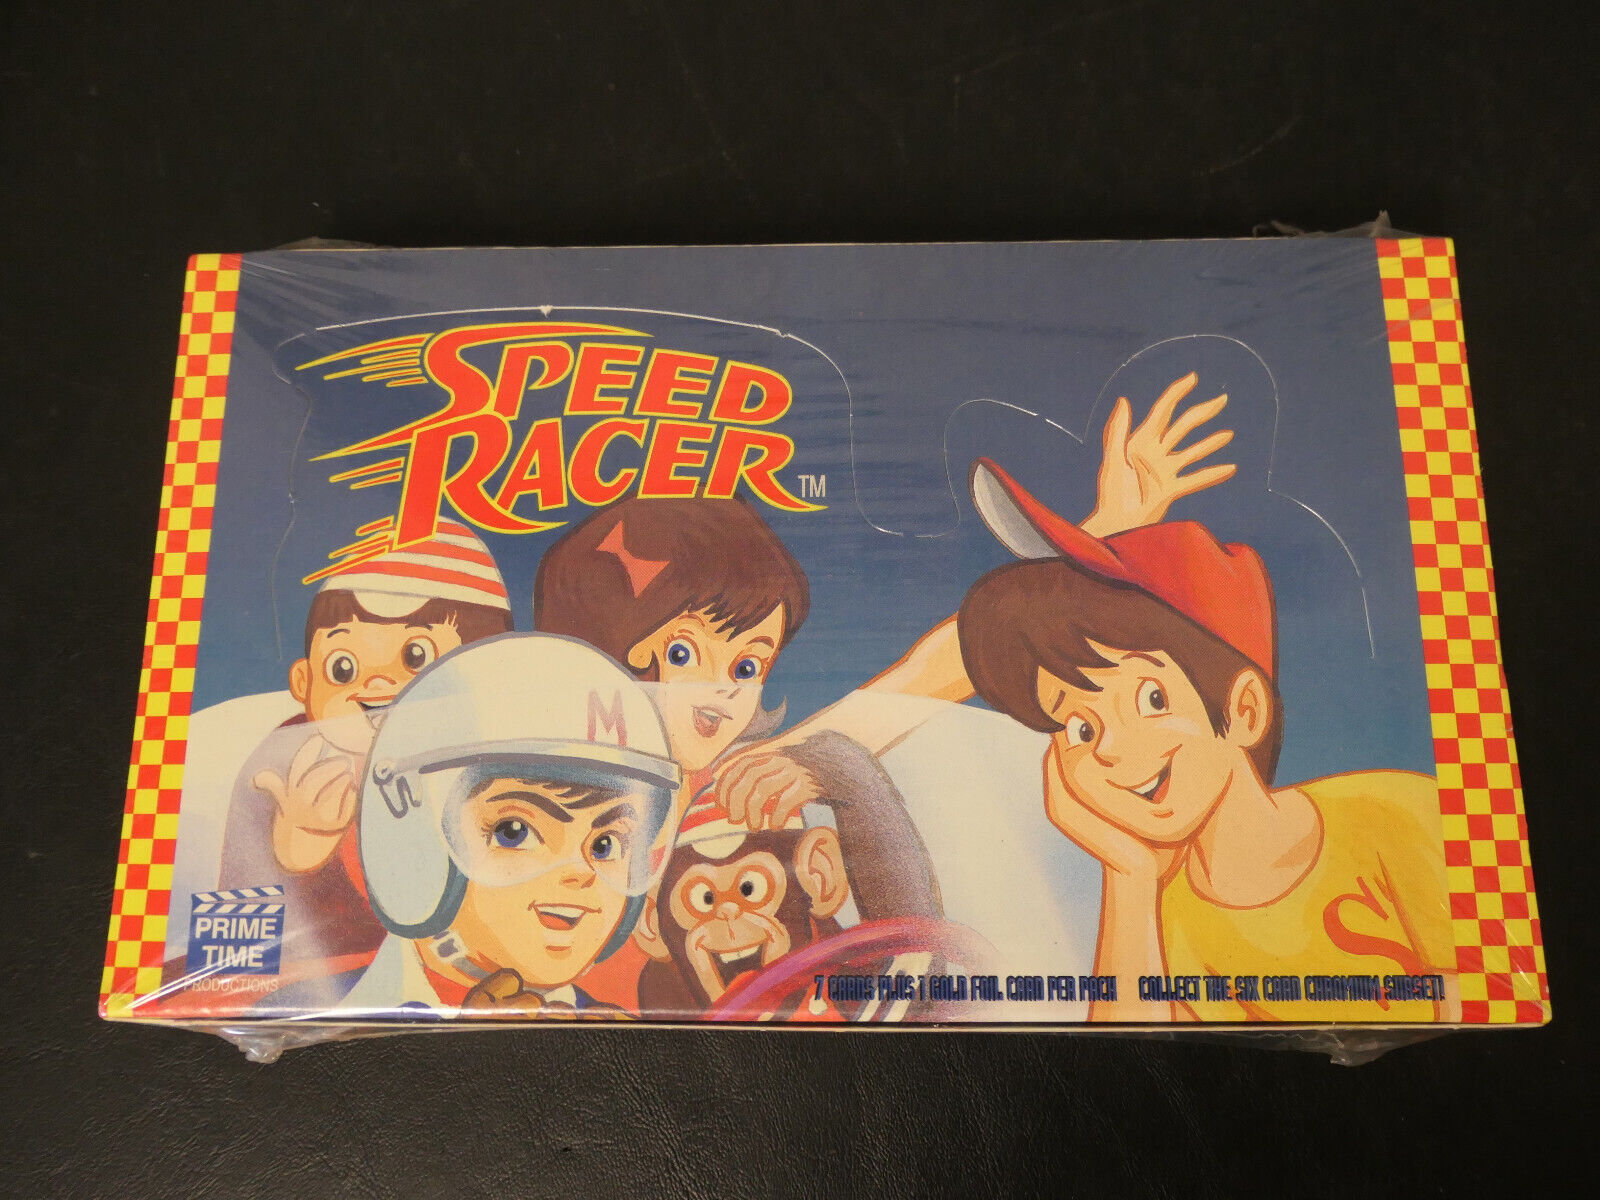 1993 Speed Racer Vintage Trading Card Box Prime Time Factory Sealed 36 Packs